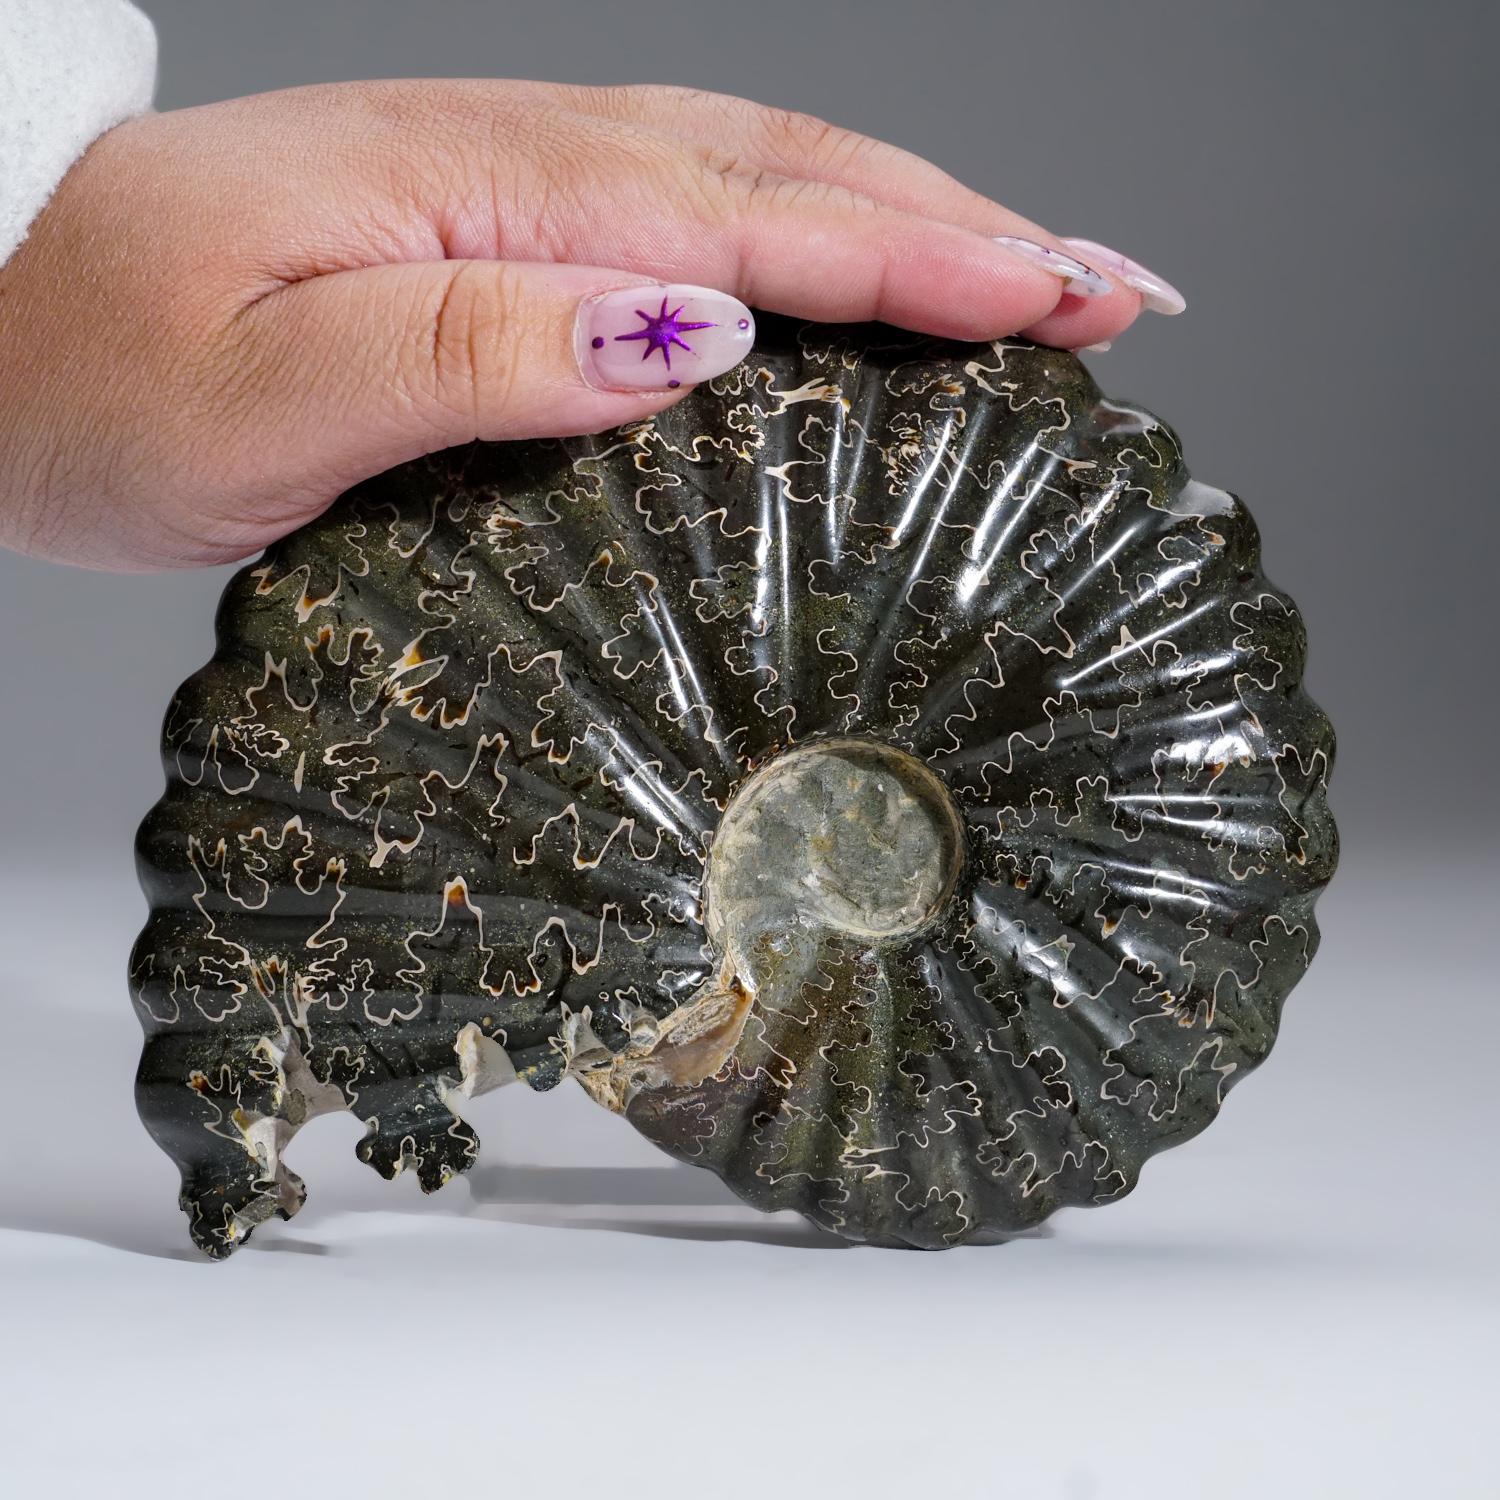 Fossilized Phylloceras Ammonite from Madagascar. This large, stunning ammonite measures 6 inch at its widest point and has been hand polished to reveal its colorful calcite replacements and impressive patterns. This ammonite dating from the